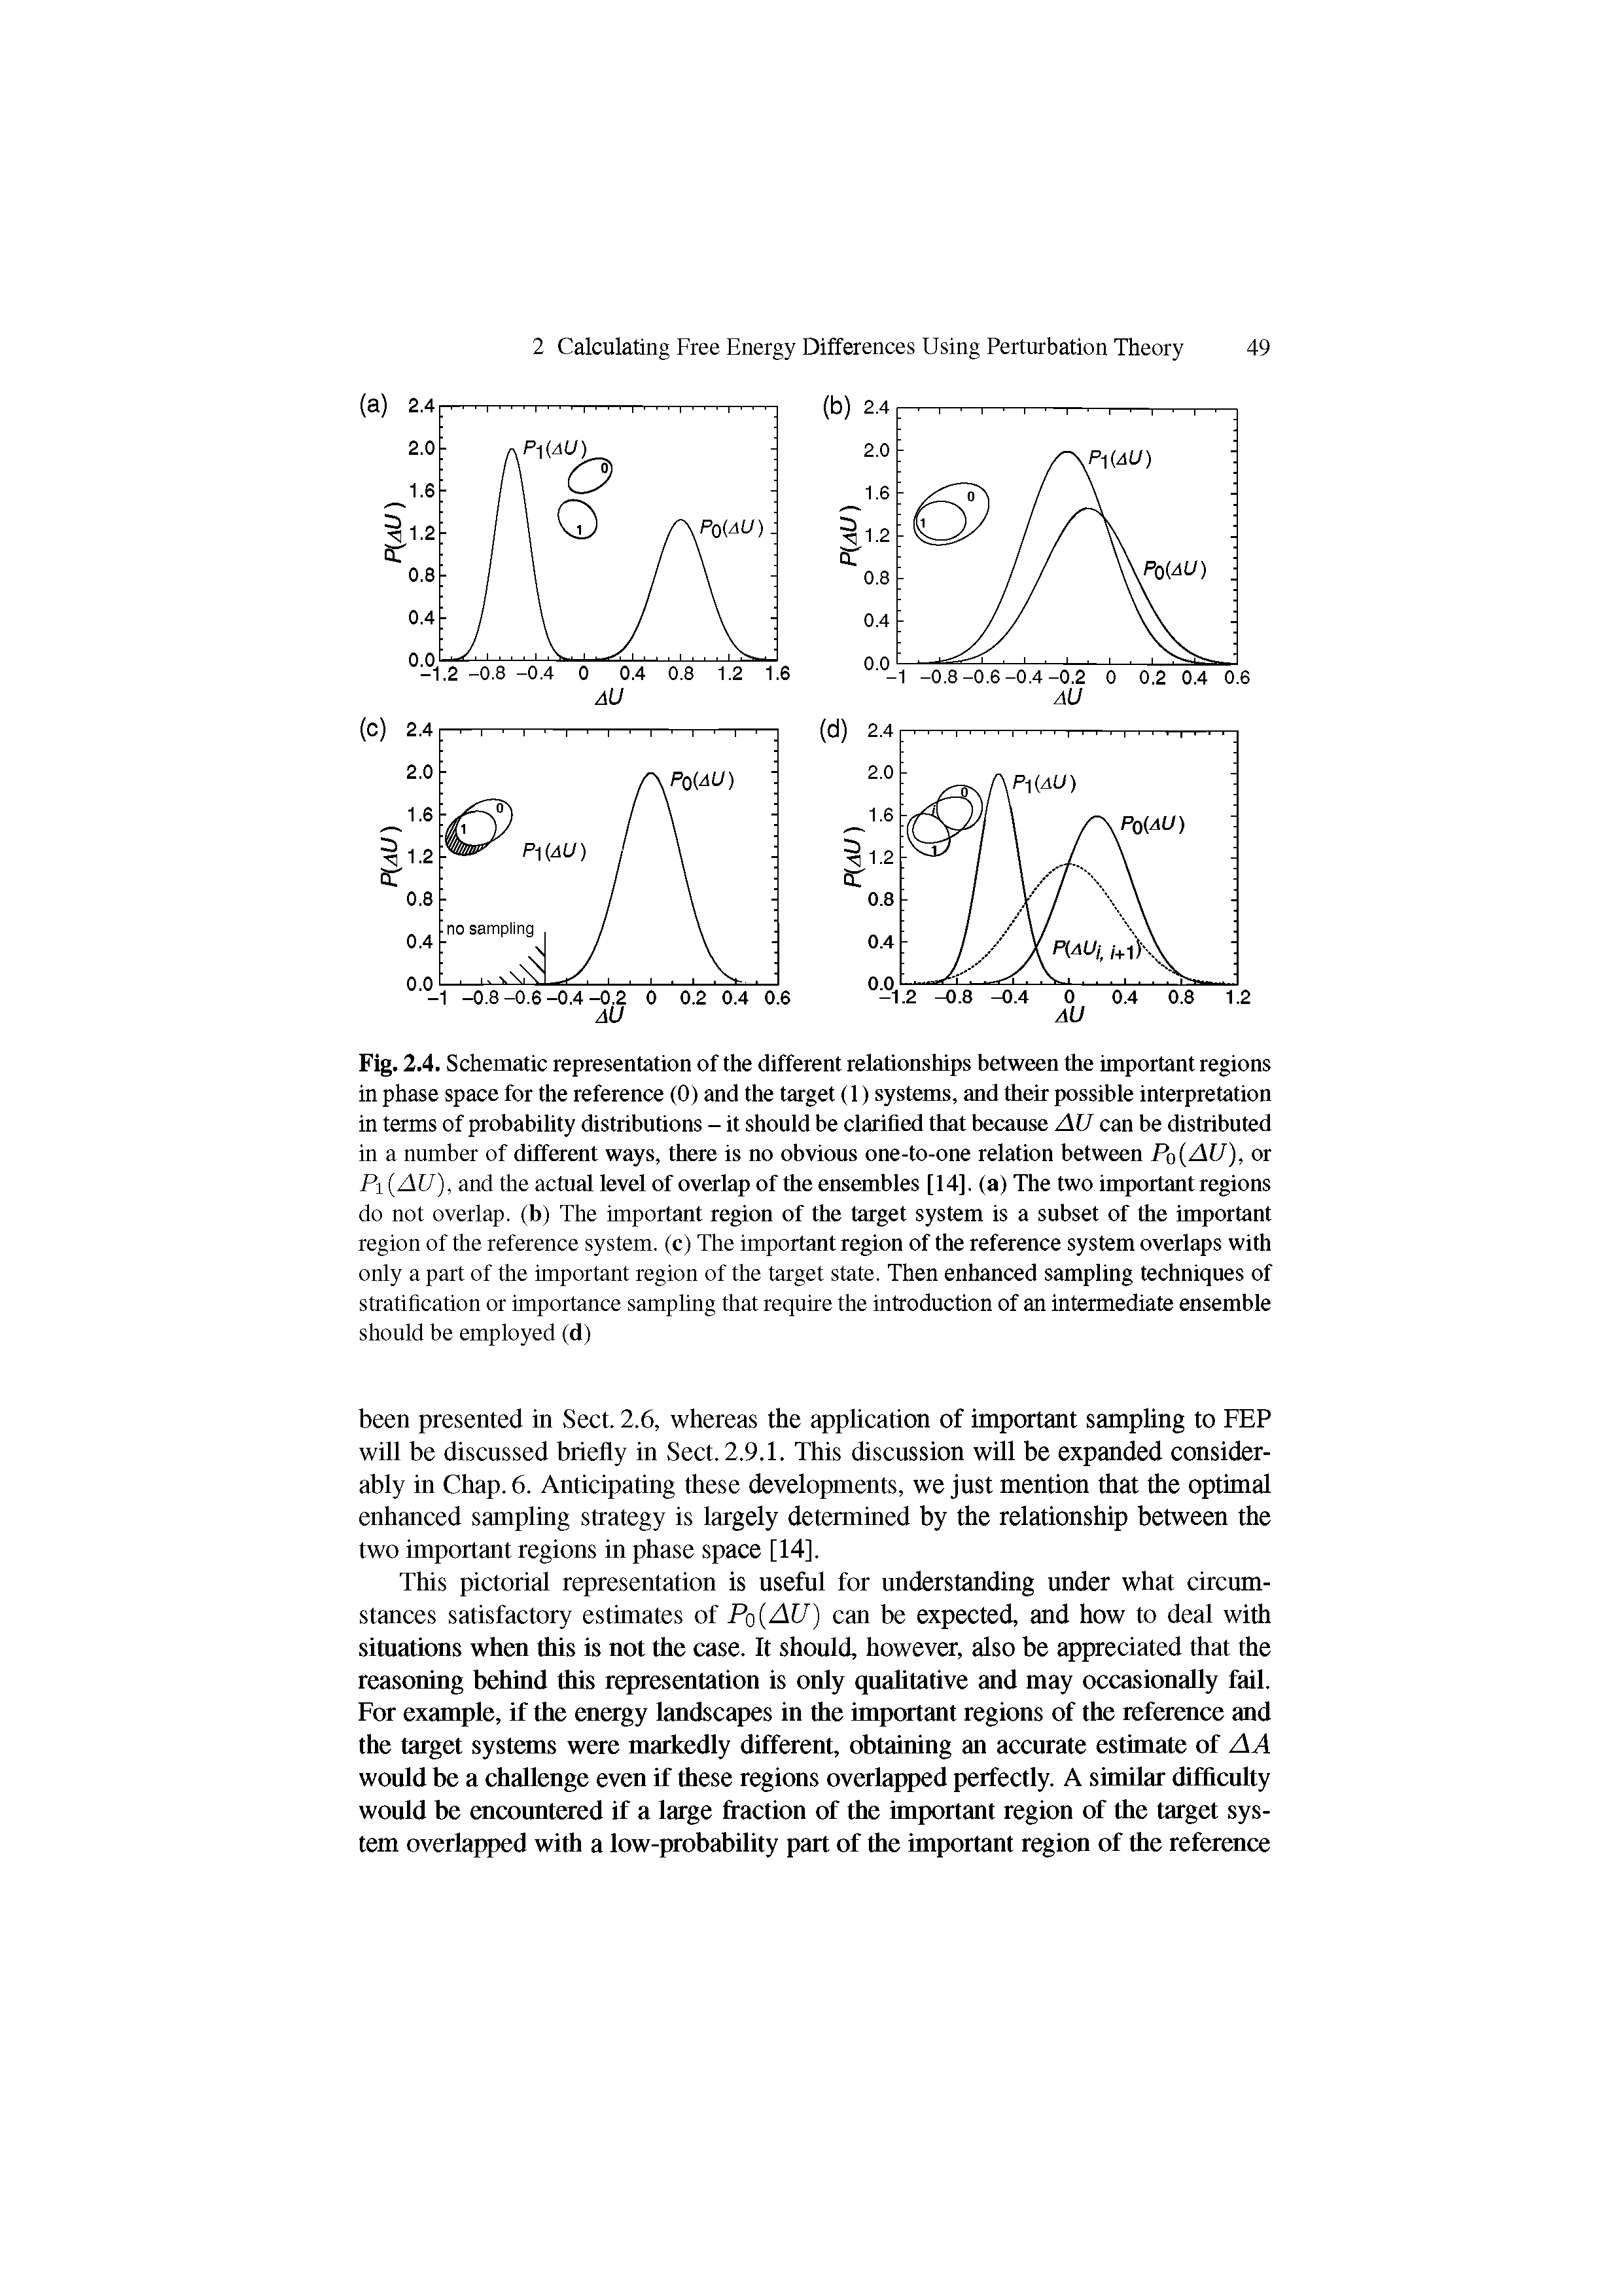 Fig. 2.4. Schematic representation of the different relationships between the important regions in phase space for the reference (0) and the target (1) systems, and their possible interpretation in terms of probability distributions - it should be clarified that because AU can be distributed in a number of different ways, there is no obvious one-to-one relation between P0(AU), or Pi (AU), and the actual level of overlap of the ensembles [14]. (a) The two important regions do not overlap, (b) The important region of the target system is a subset of the important region of the reference system, (c) The important region of the reference system overlaps with only a part of the important region of the target state. Then enhanced sampling techniques of stratification or importance sampling that require the introduction of an intermediate ensemble should be employed (d)...